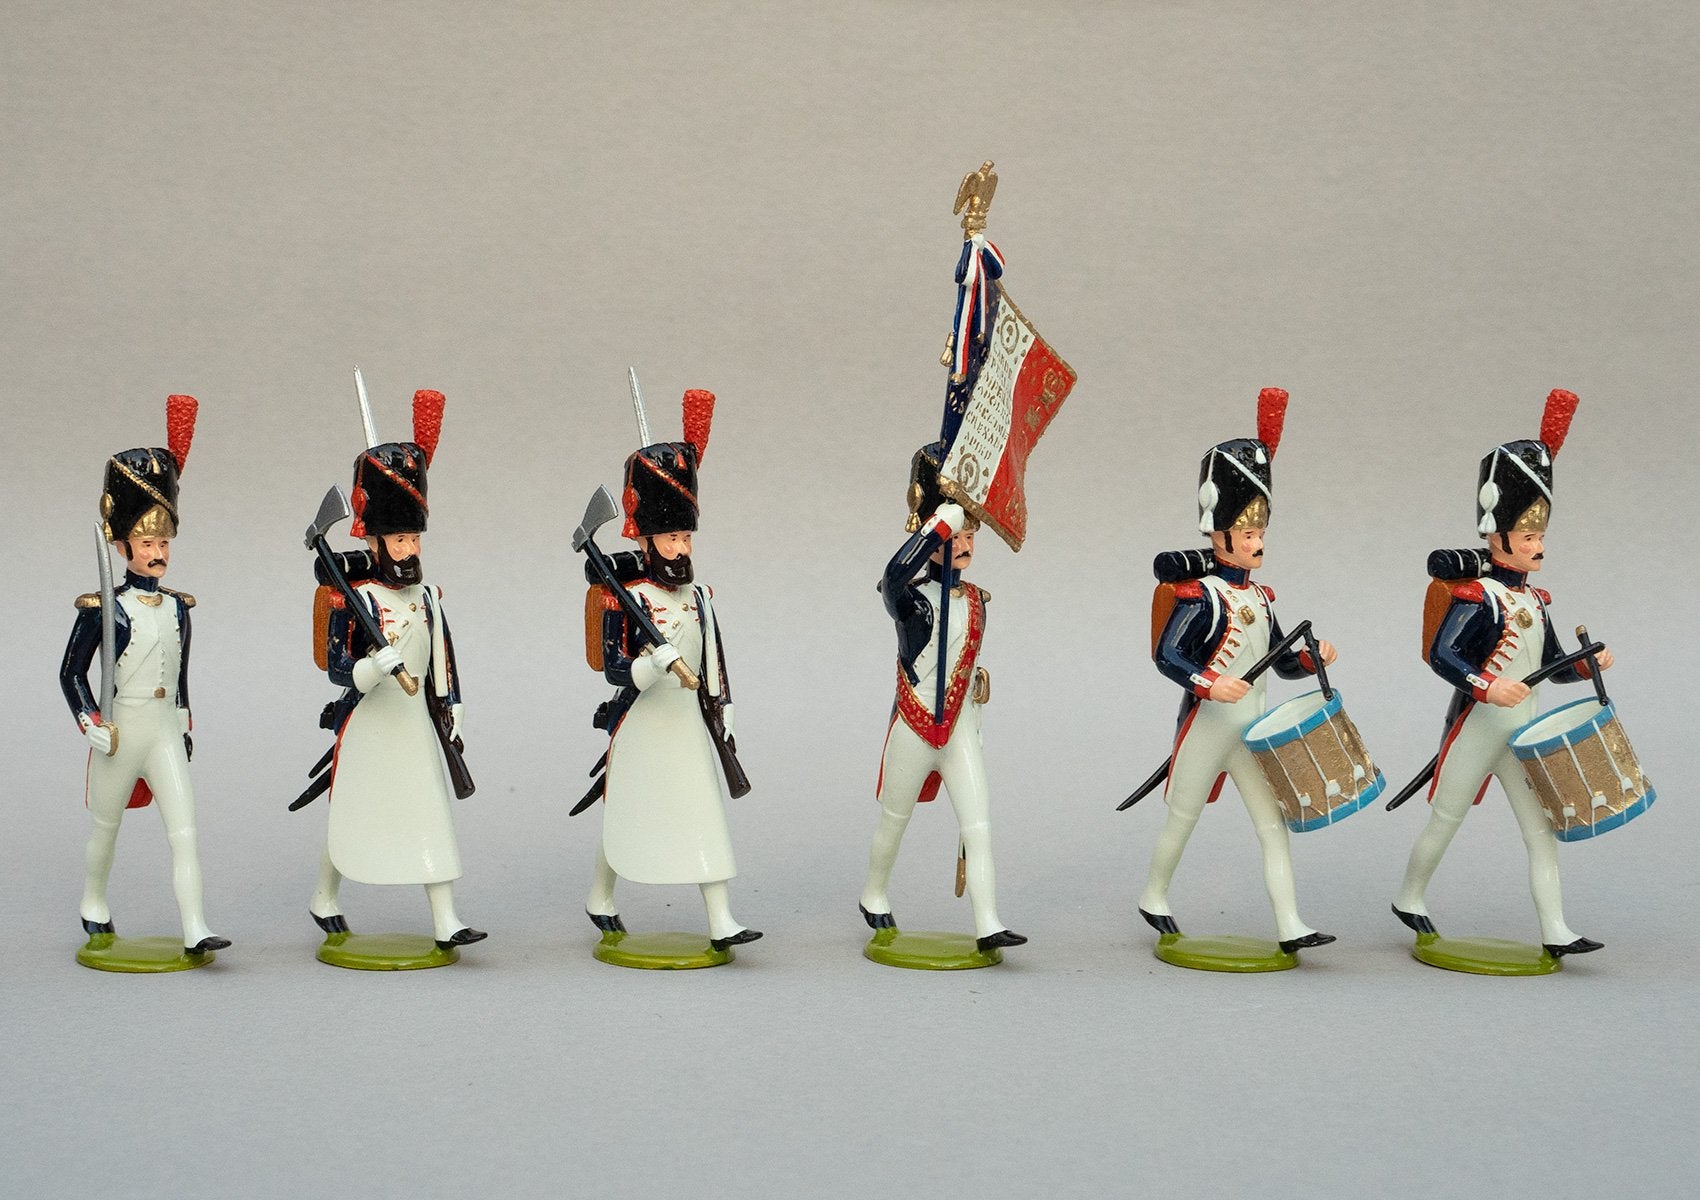 Set 110 Grenadiers à Pied, Head of Column, 1st Empire | French Infantry | Napoleonic Wars | Set of six men, one officer with sword, one ensign with colours and battle honours, two drummers and two pioneers marching | Waterloo | © Imperial Productions | Sculpt by David Cowe